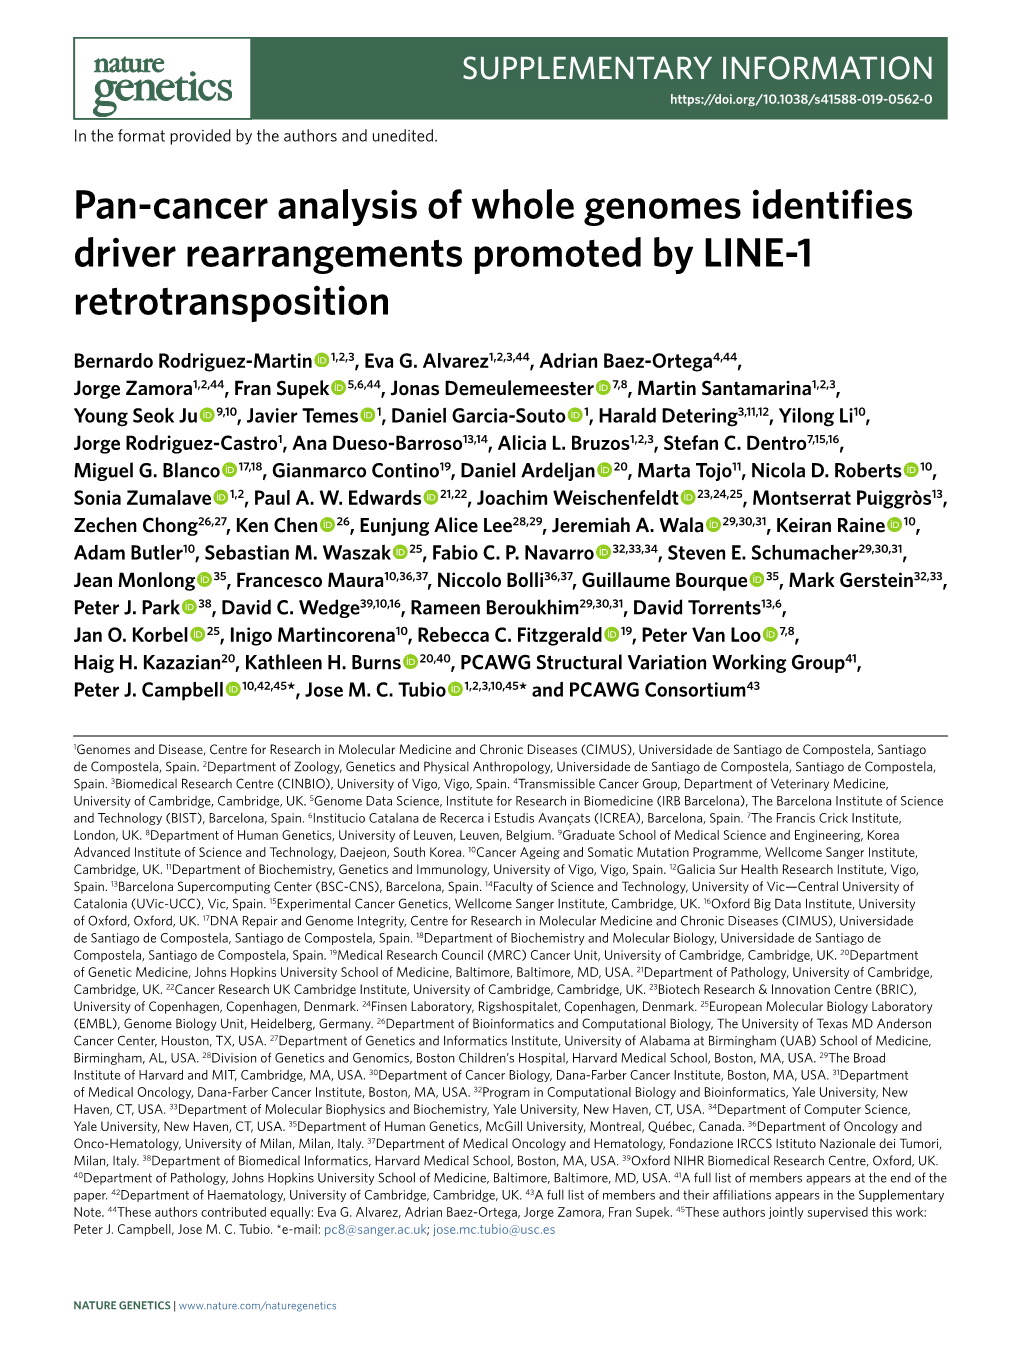 Pan-Cancer Analysis of Whole Genomes Identifies Driver Rearrangements Promoted by LINE-1 Retrotransposition